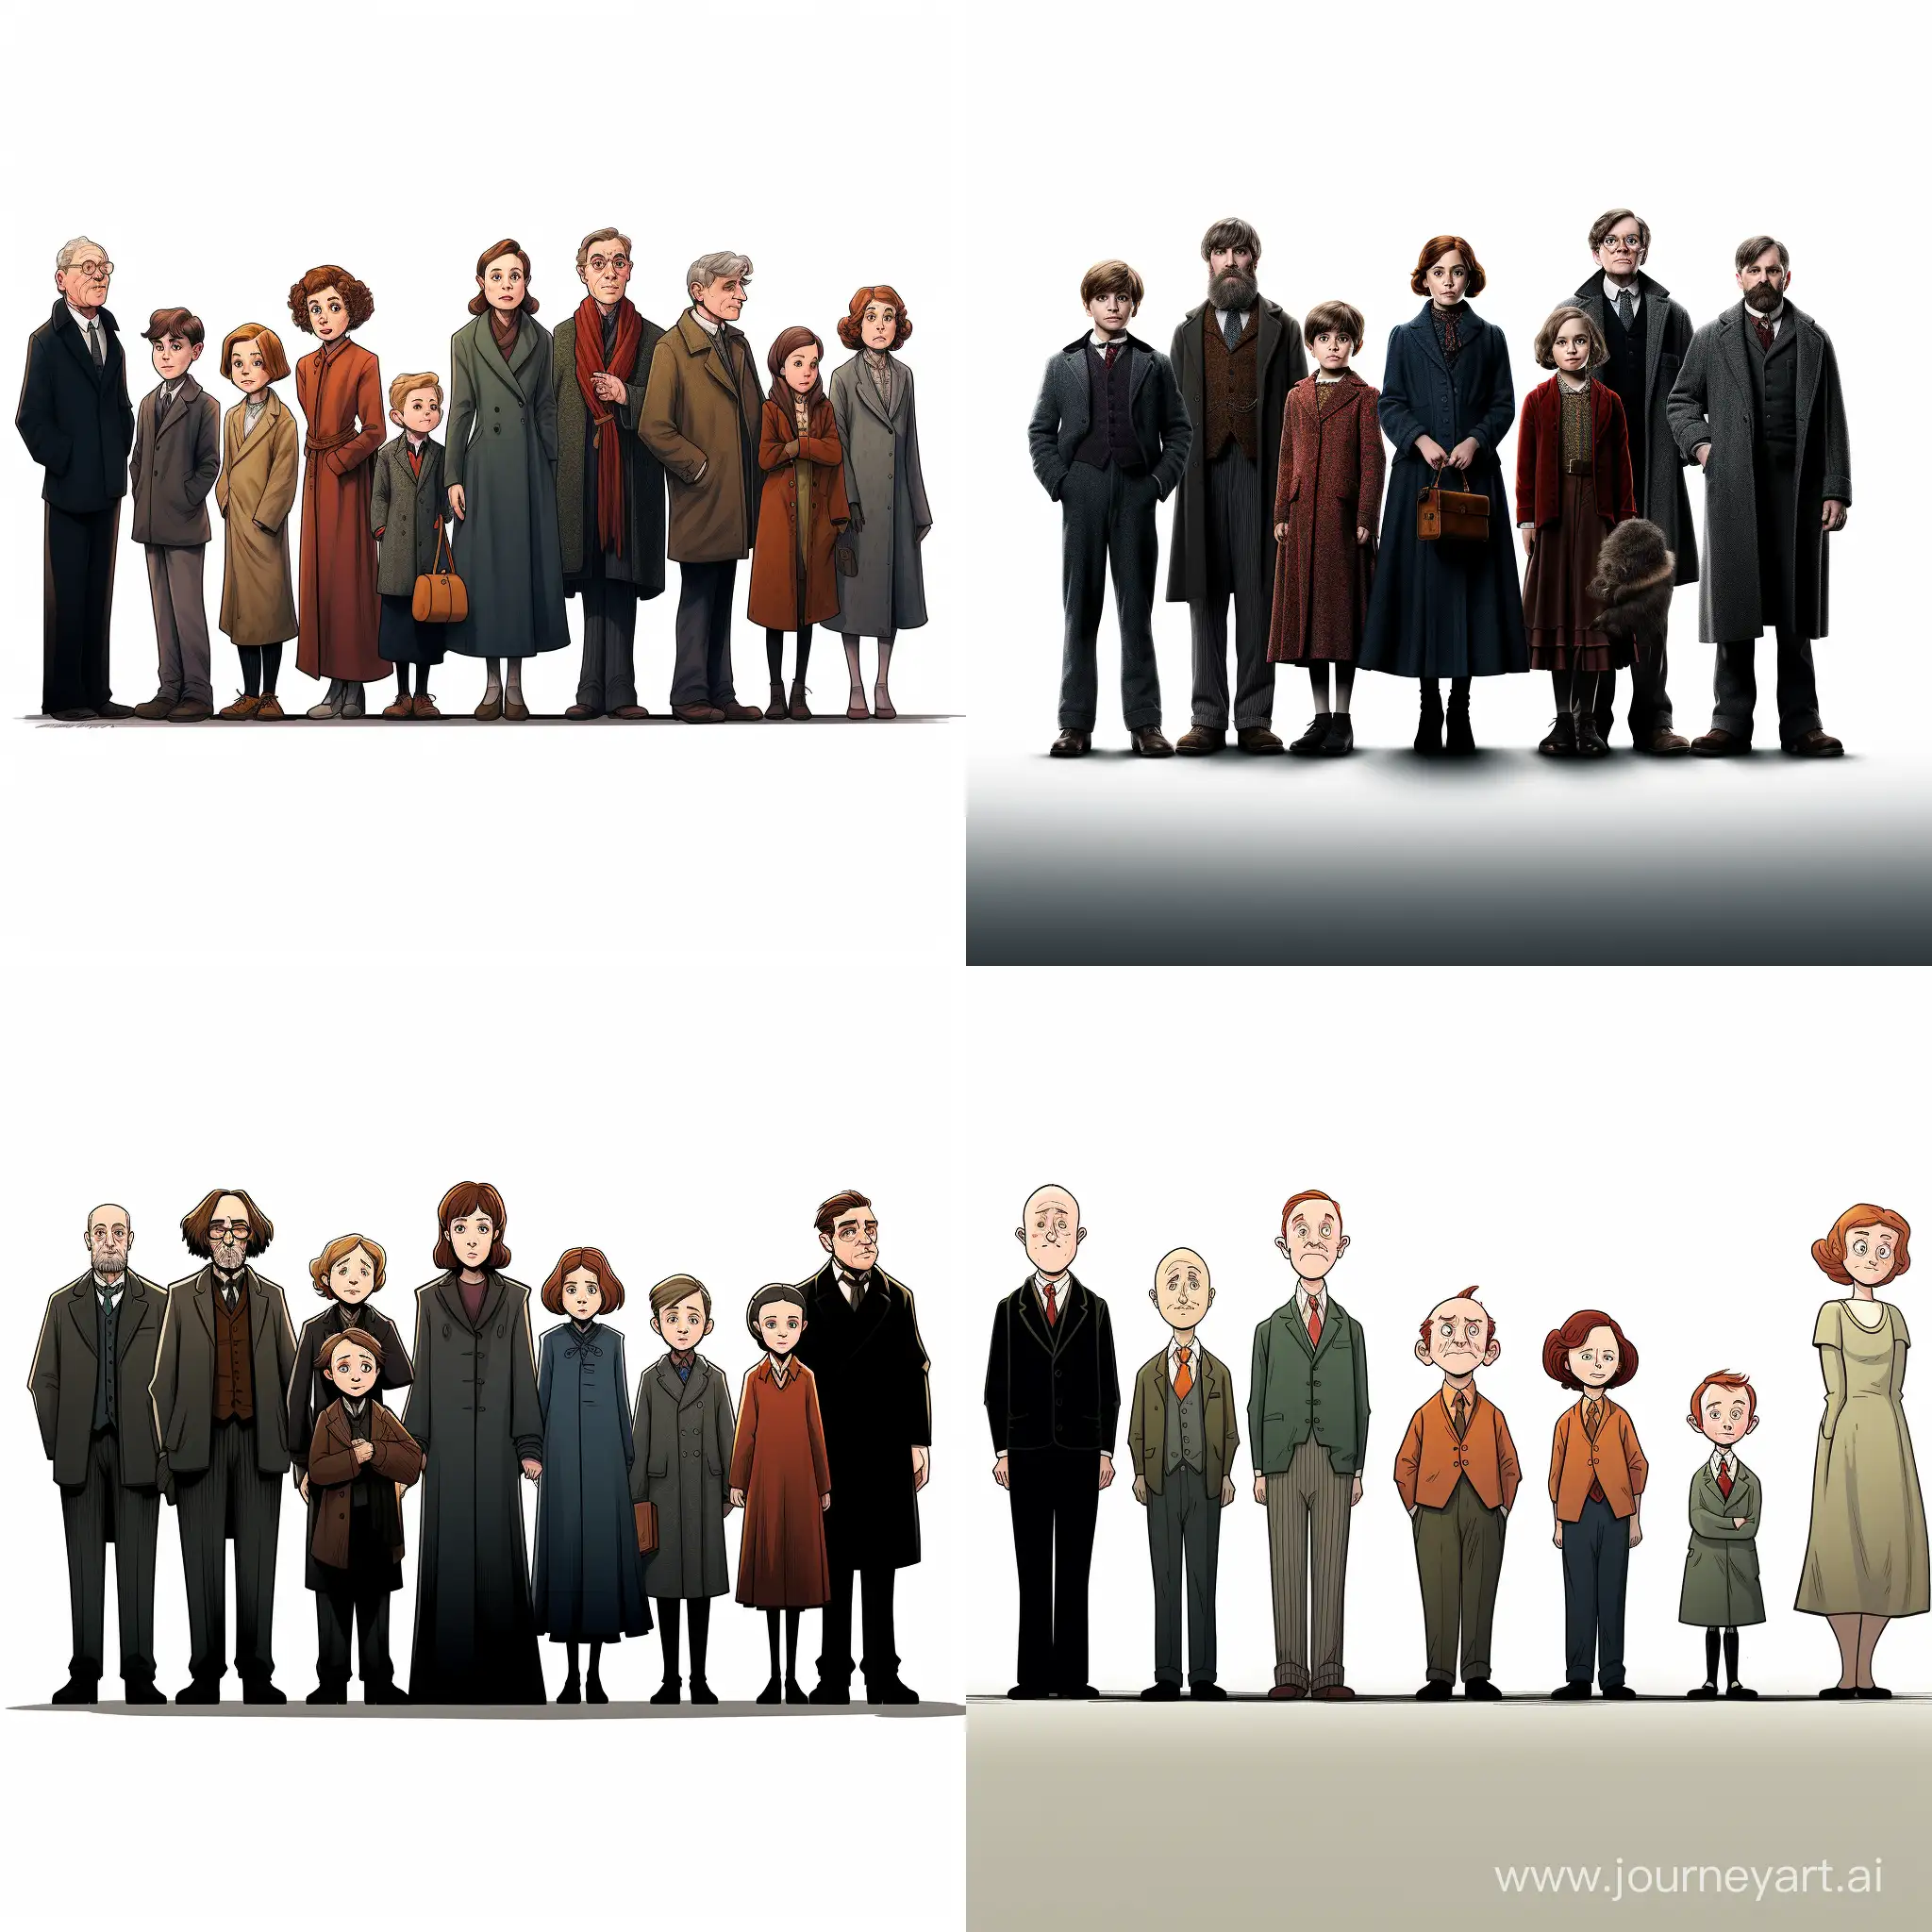 The full-length figures stand apart from each other at a distance:
A young Emma Watson as Hermione; Fiona Shaw as Petunia Dursle; Richard Griffiths as Vernon Dursle,
Rafe Fiennes as Voldemort, Rupert Grint as Ron Weasley Against a white background, cartoon style.